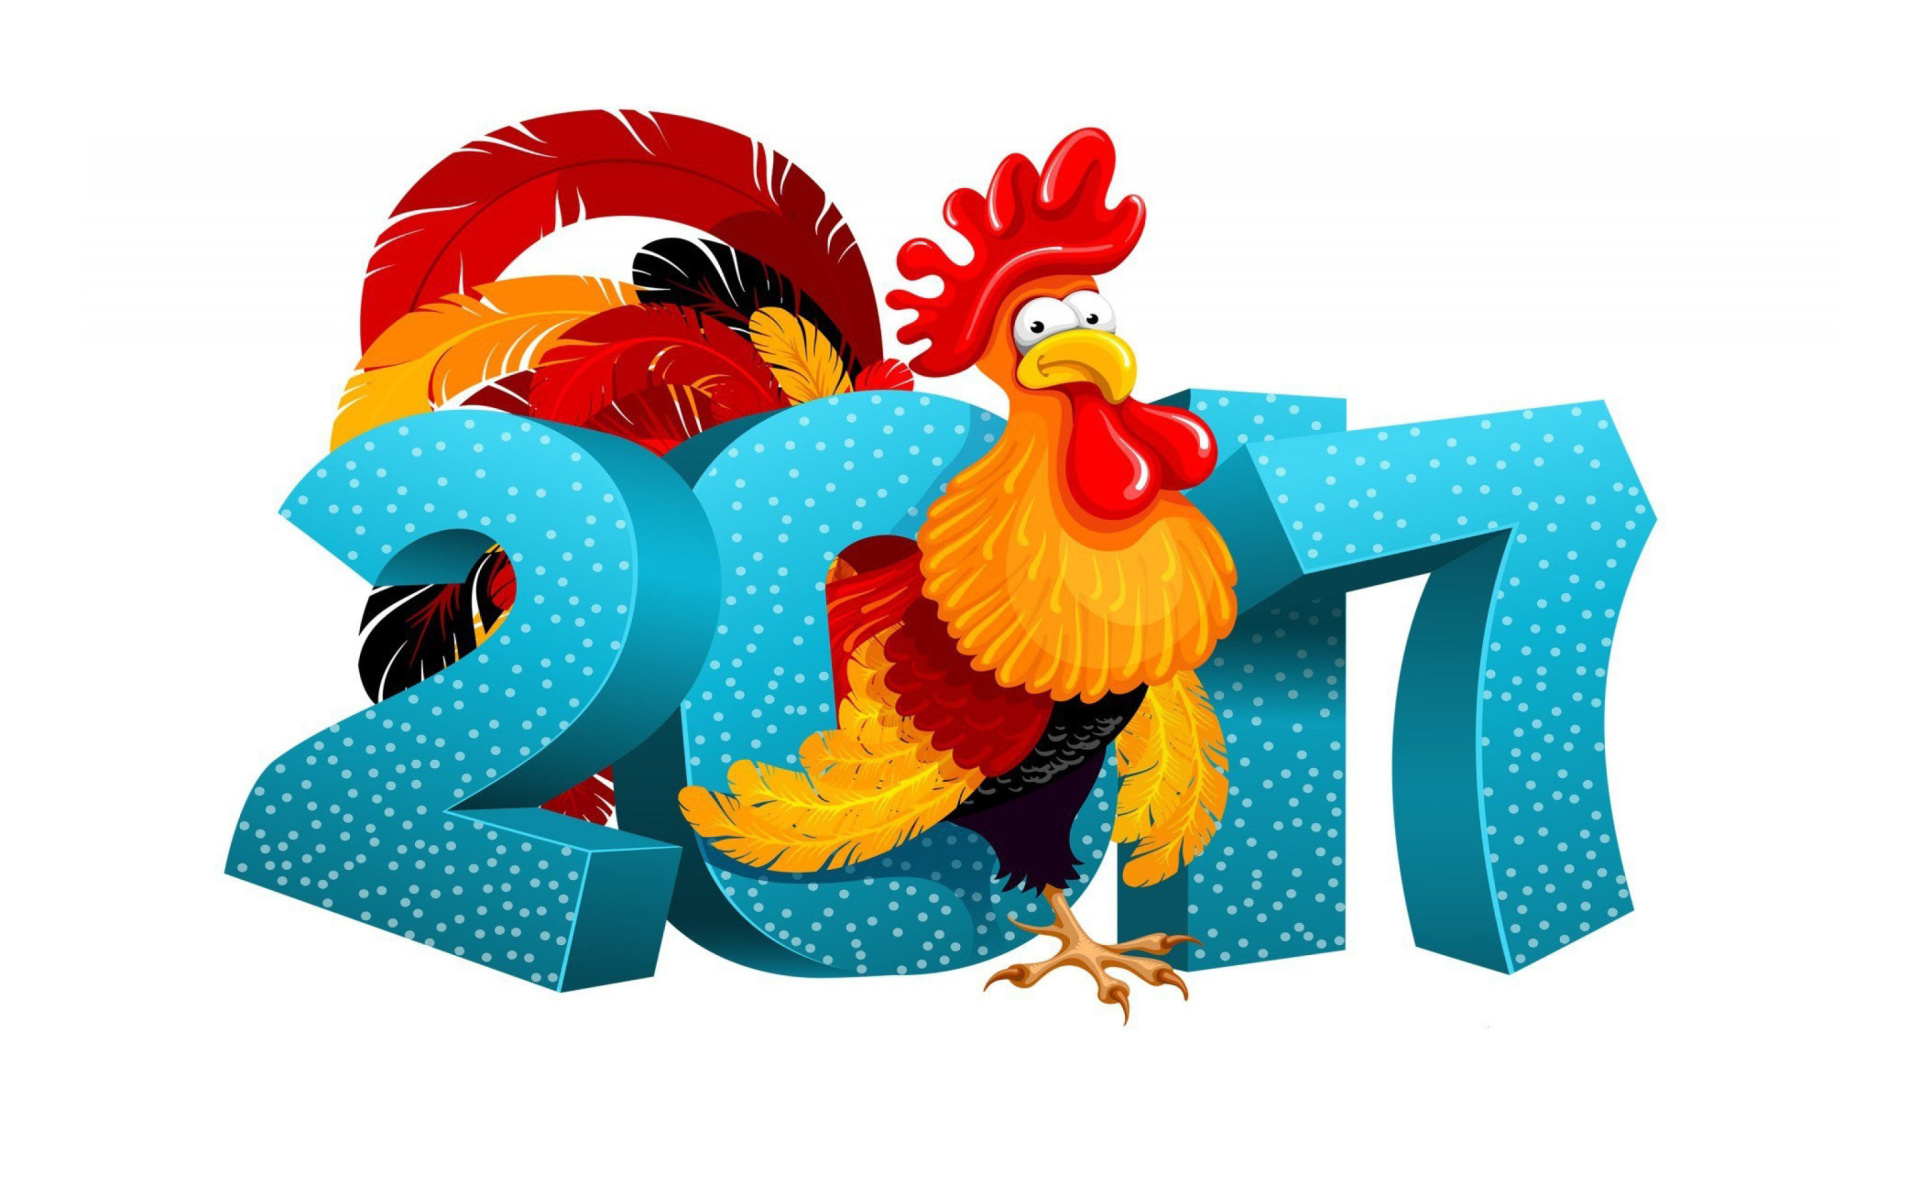 Das 2017 New Year Chinese Horoscope Red Cock Rooster Wallpaper 1920x1200